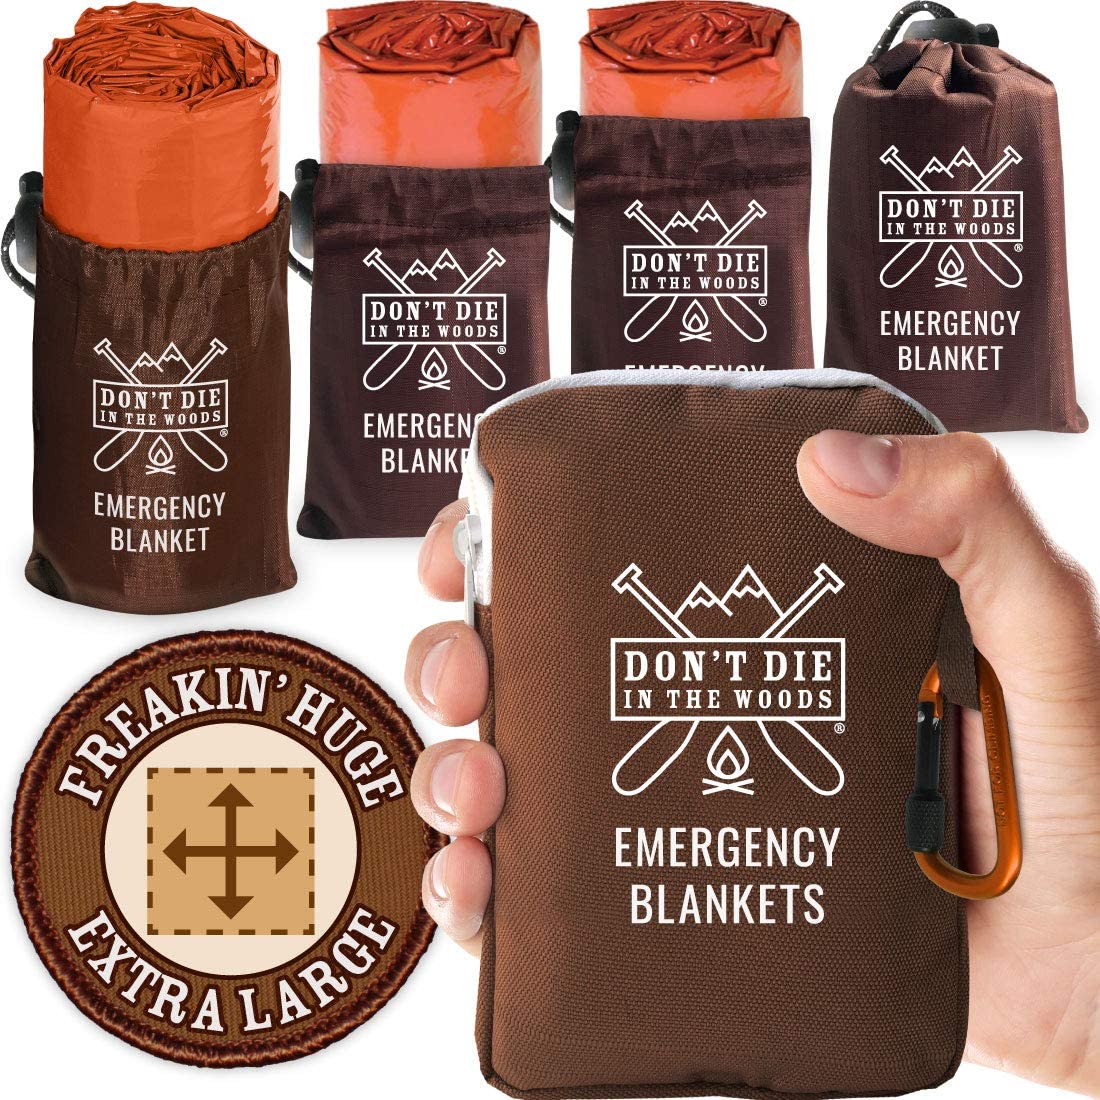 ITEM# 0104 Freakin' Huge Emergency Blankets [4-Pack] Extra-Large Therm –  The Order Store.Com